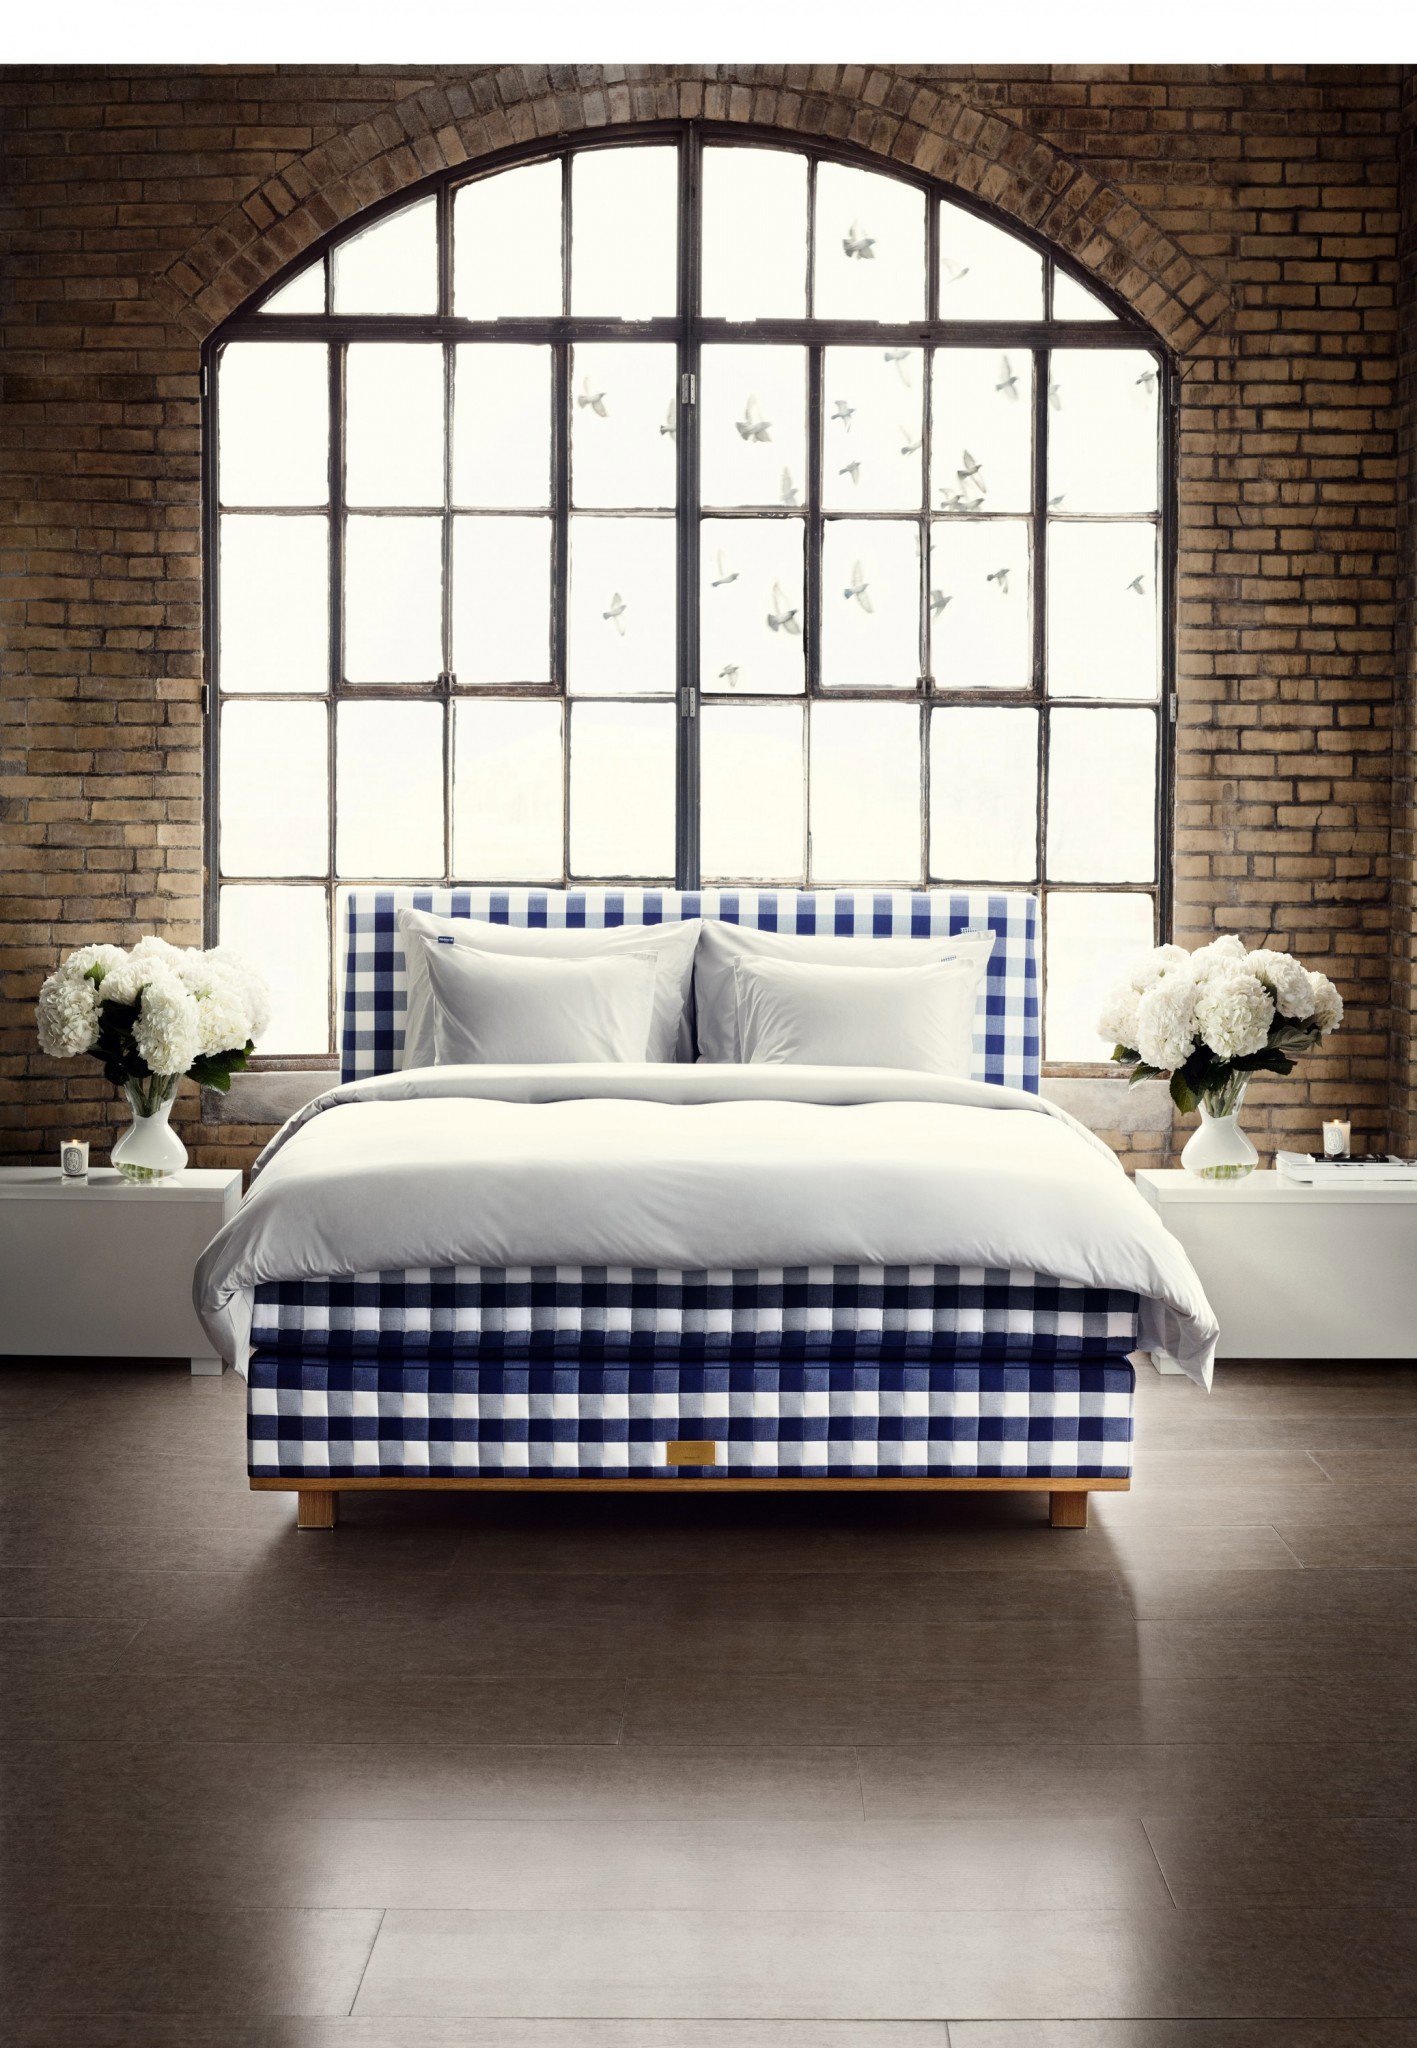 Hastens Lifestyle Images14